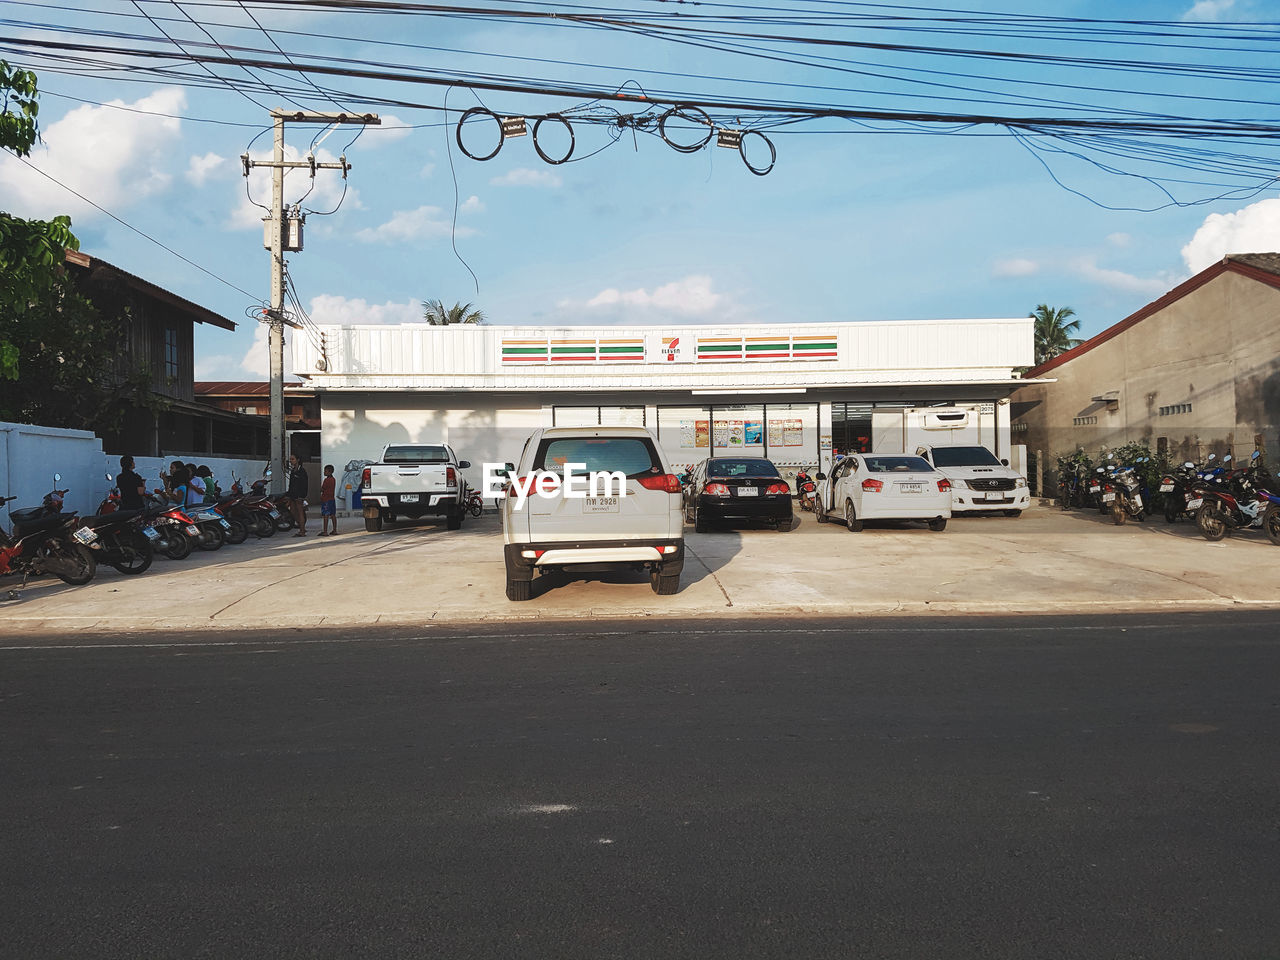 First Eyeem Photo 7Eleven  City Shop Car Sky Street Road Cloud - Sky Outdoors Day No People